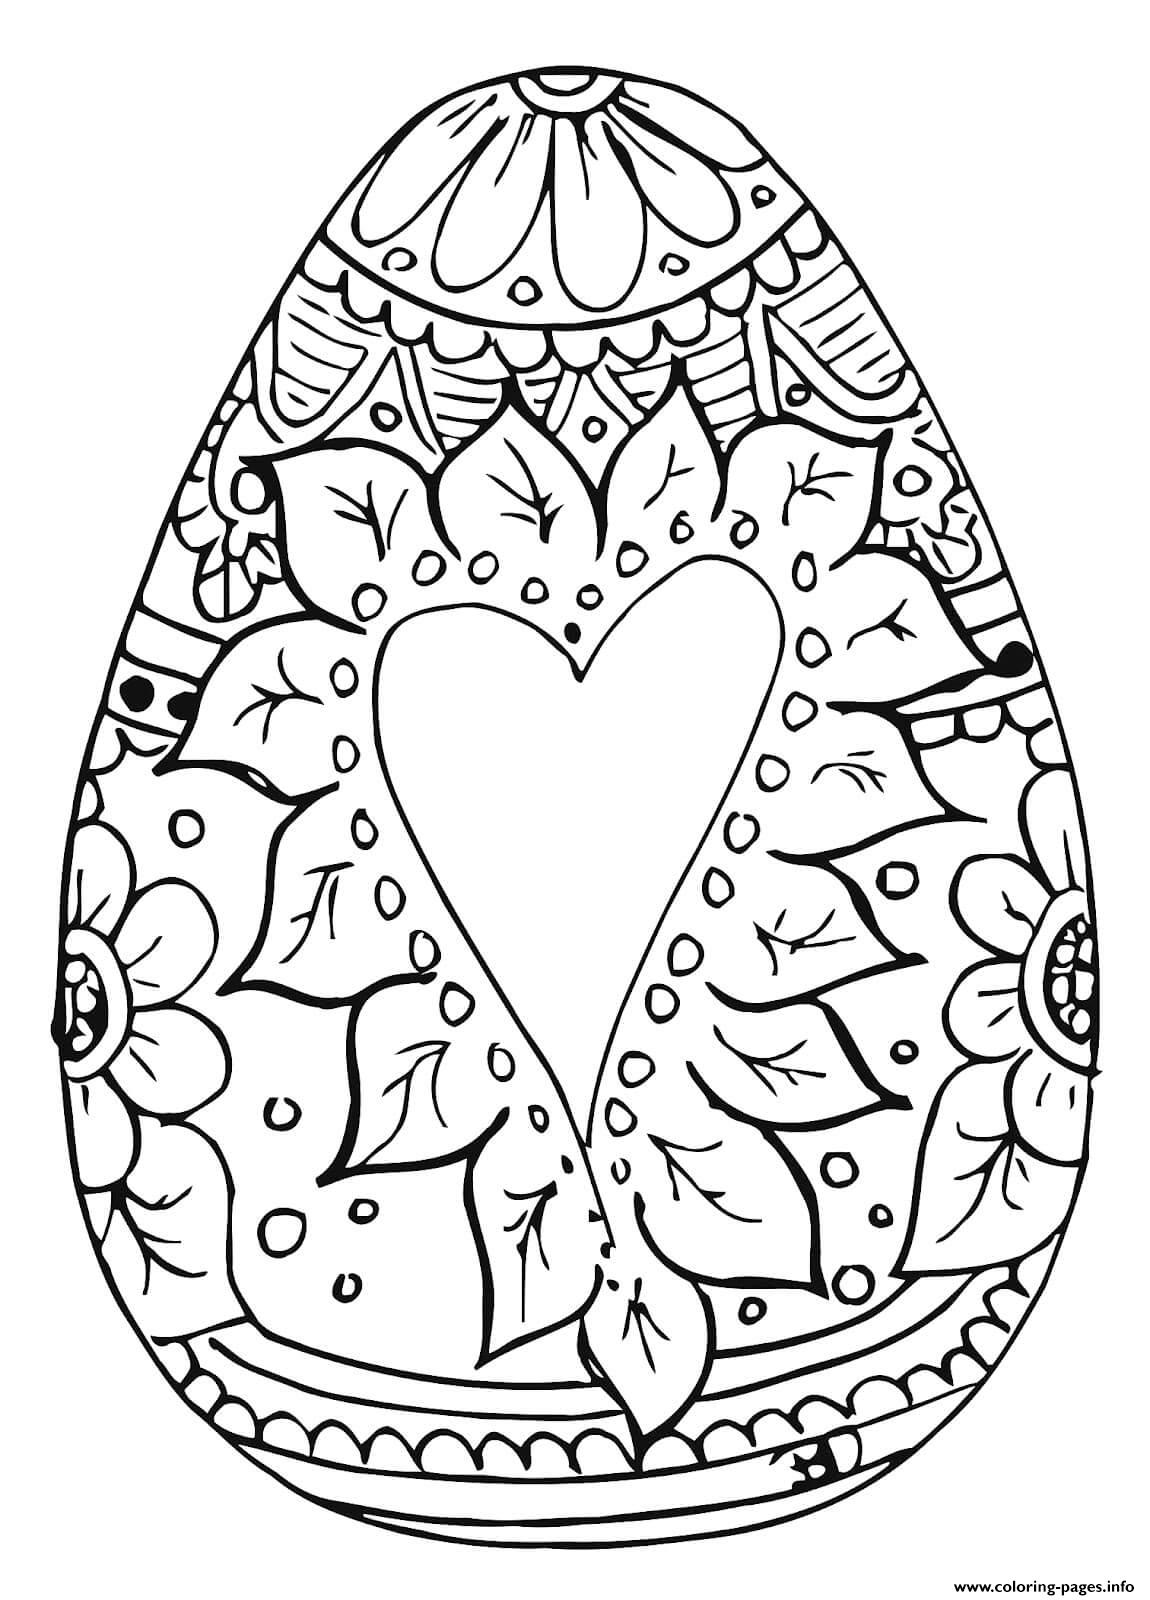 Easter Egg With Heart For Adult coloring